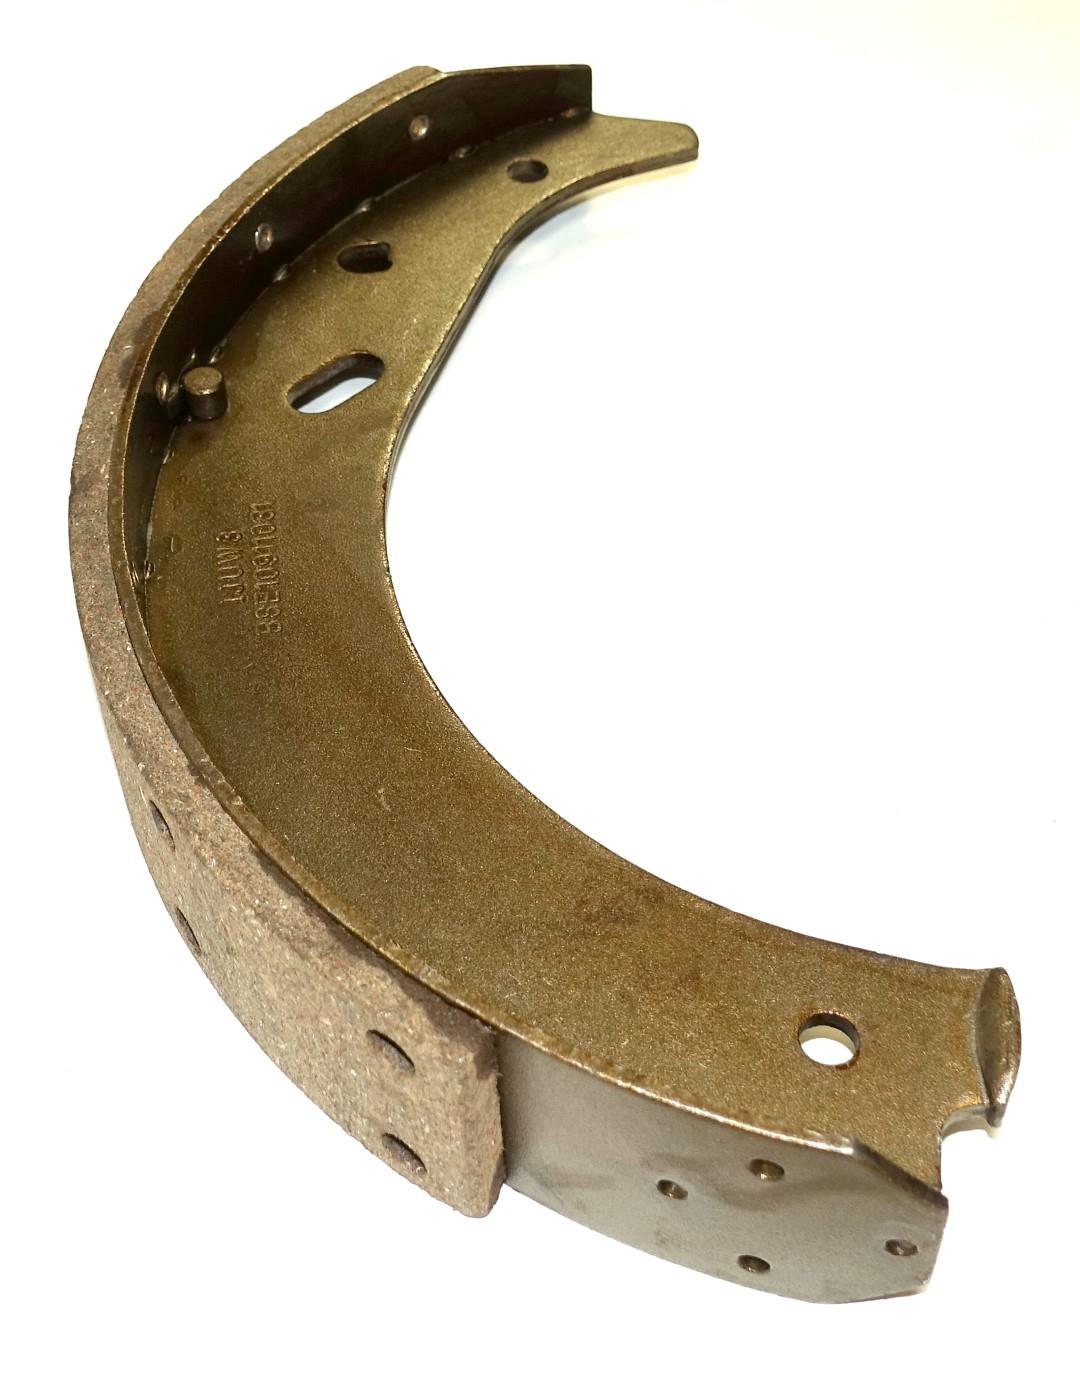 TR-245 | 2530-01-547-4956 Brake Shoe for M101A and M116A1 Trailer NOS (3) (Large).JPG